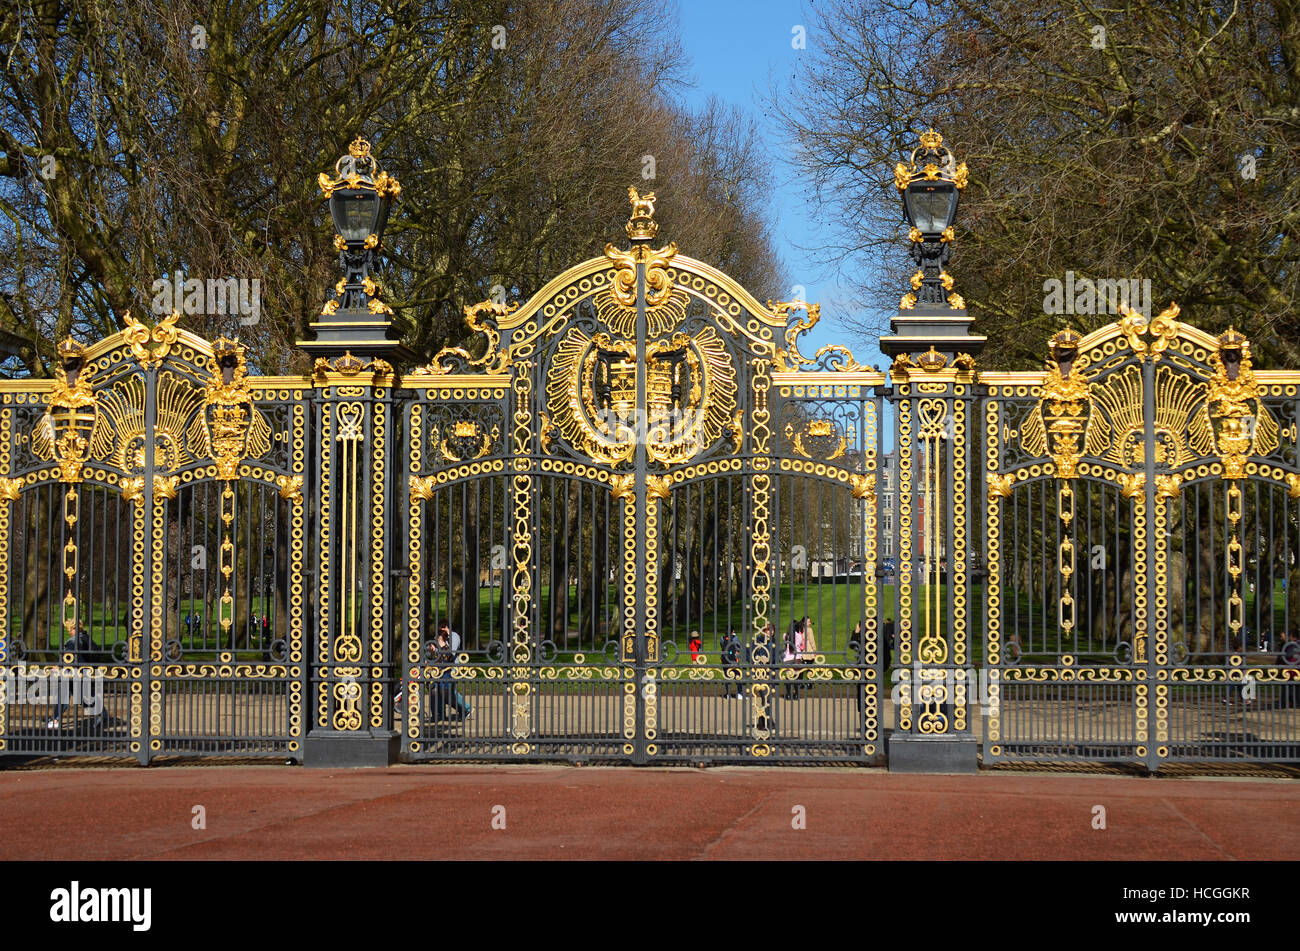 Canada Gate (Maroto Gate) forms part of the Queen Victoria Memorial scheme in London, UK. Green Park beyond Stock Photo